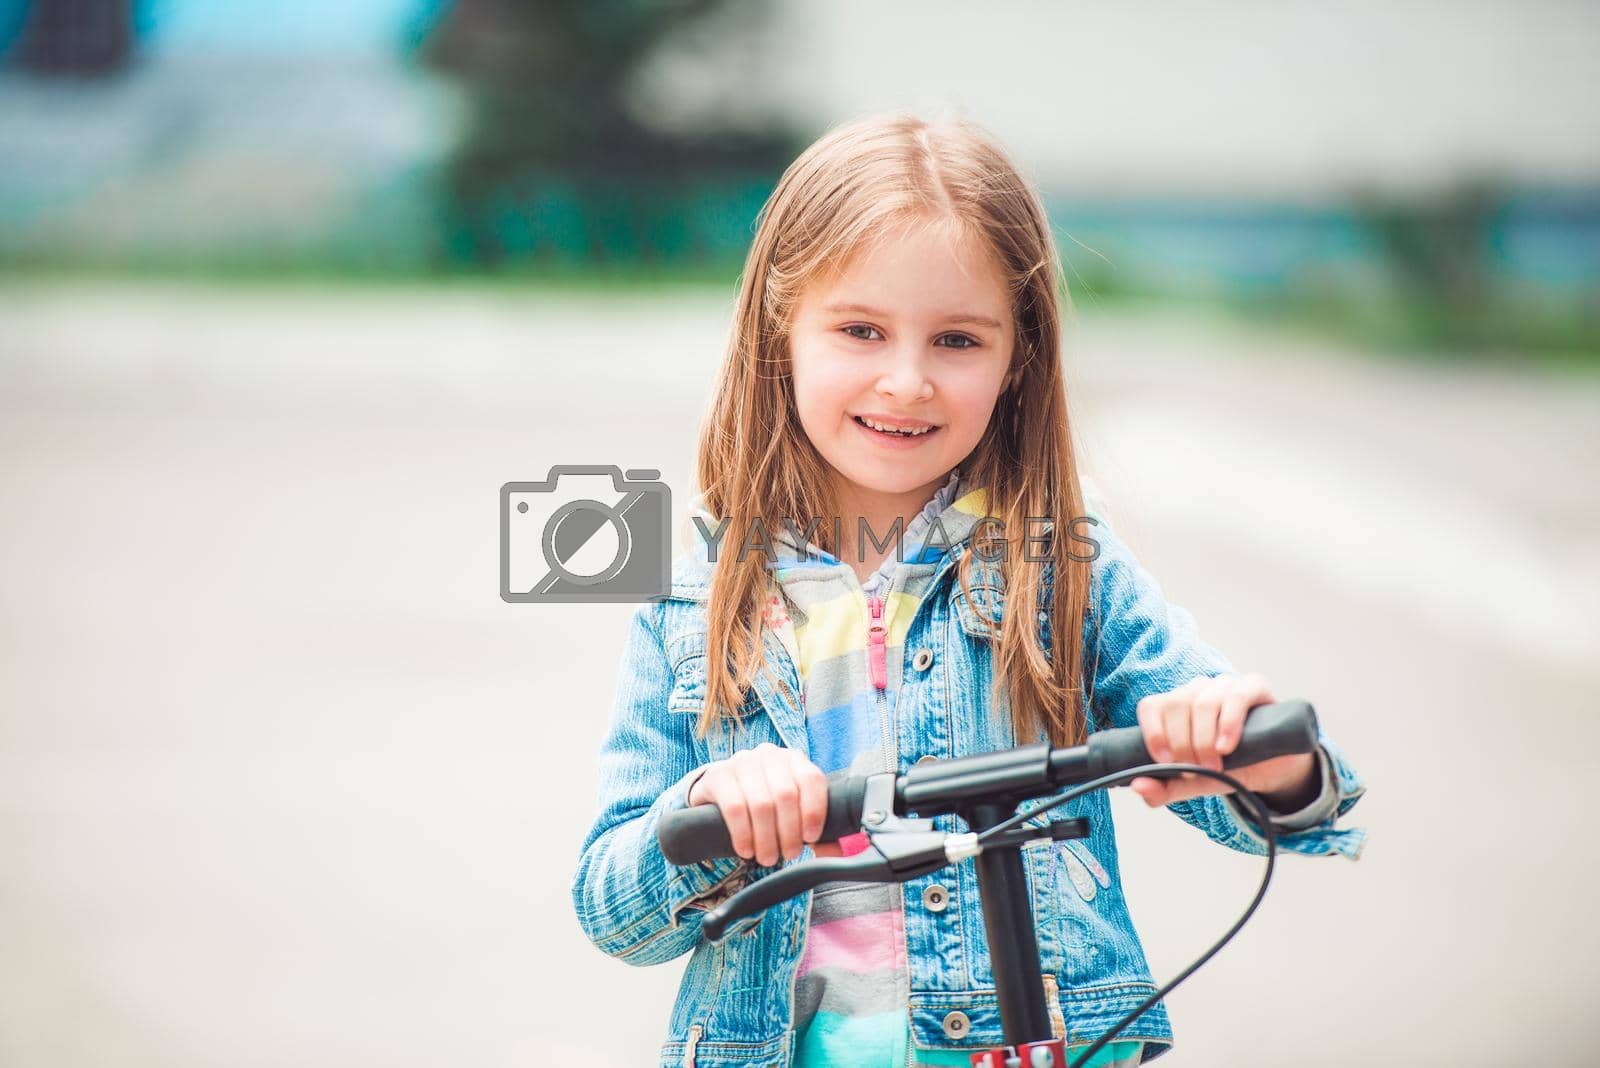 Royalty free image of Little girl with scooter by tan4ikk1